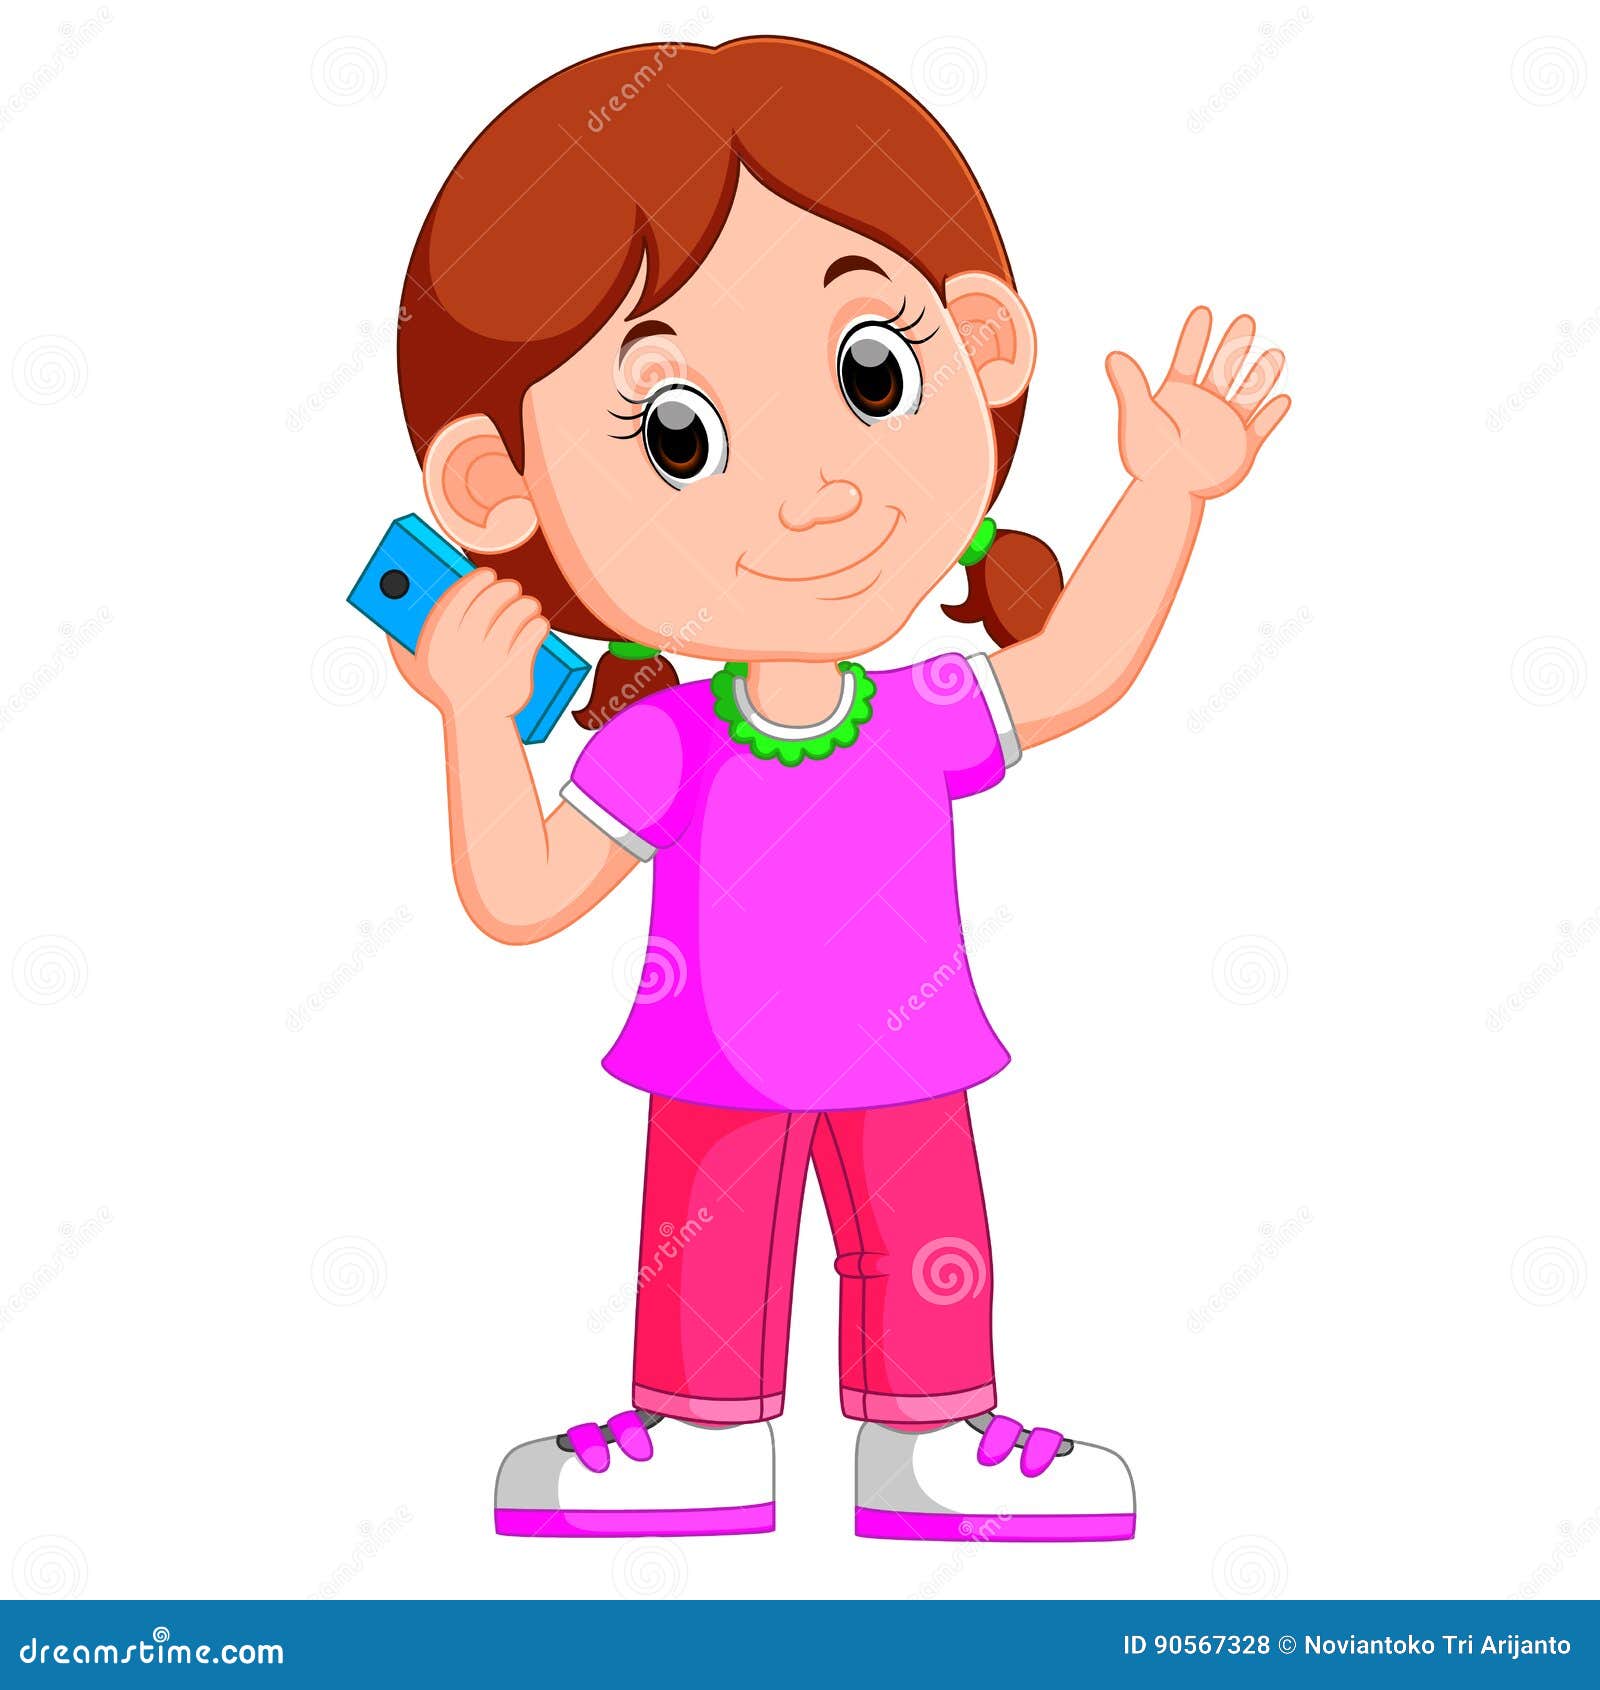 Cartoon Girl Using a Smart Phone Stock Vector - Illustration of playing,  adorable: 90567328